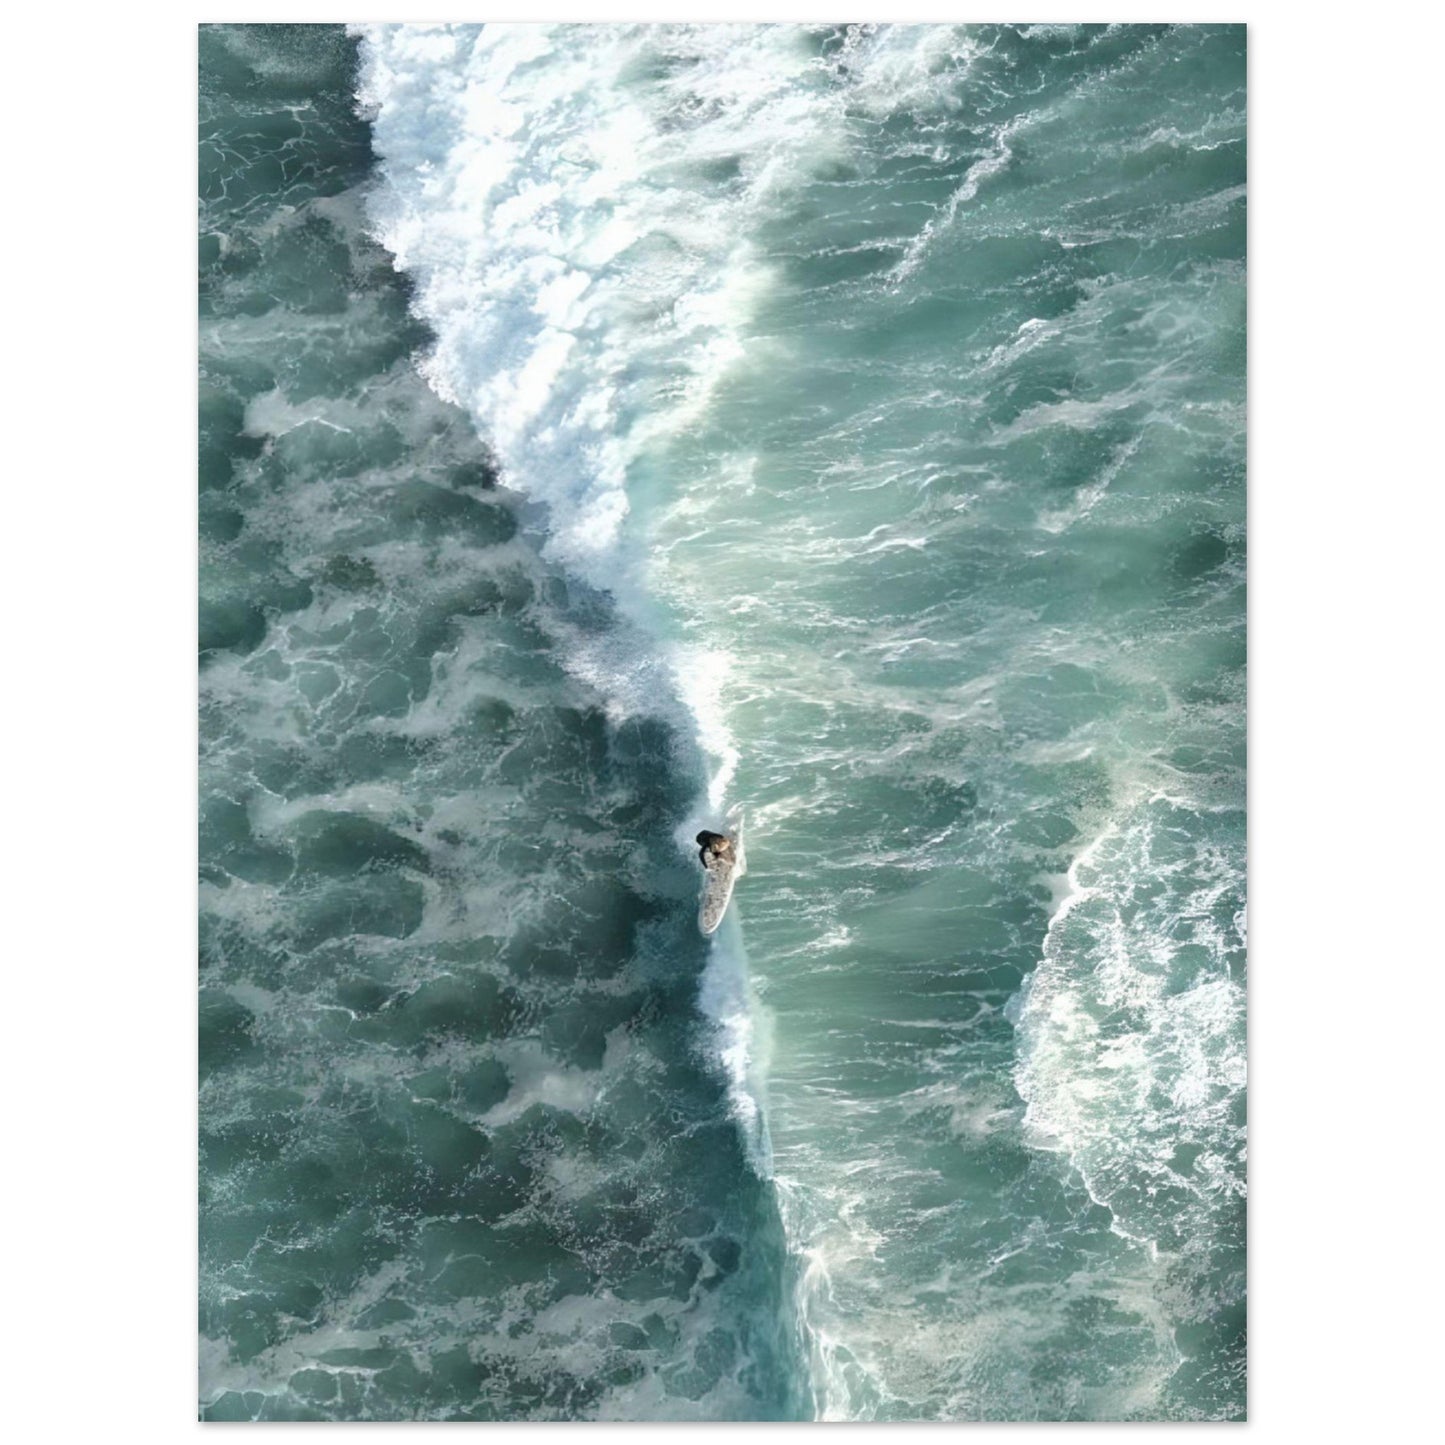 Surf Over the Waves - Poster